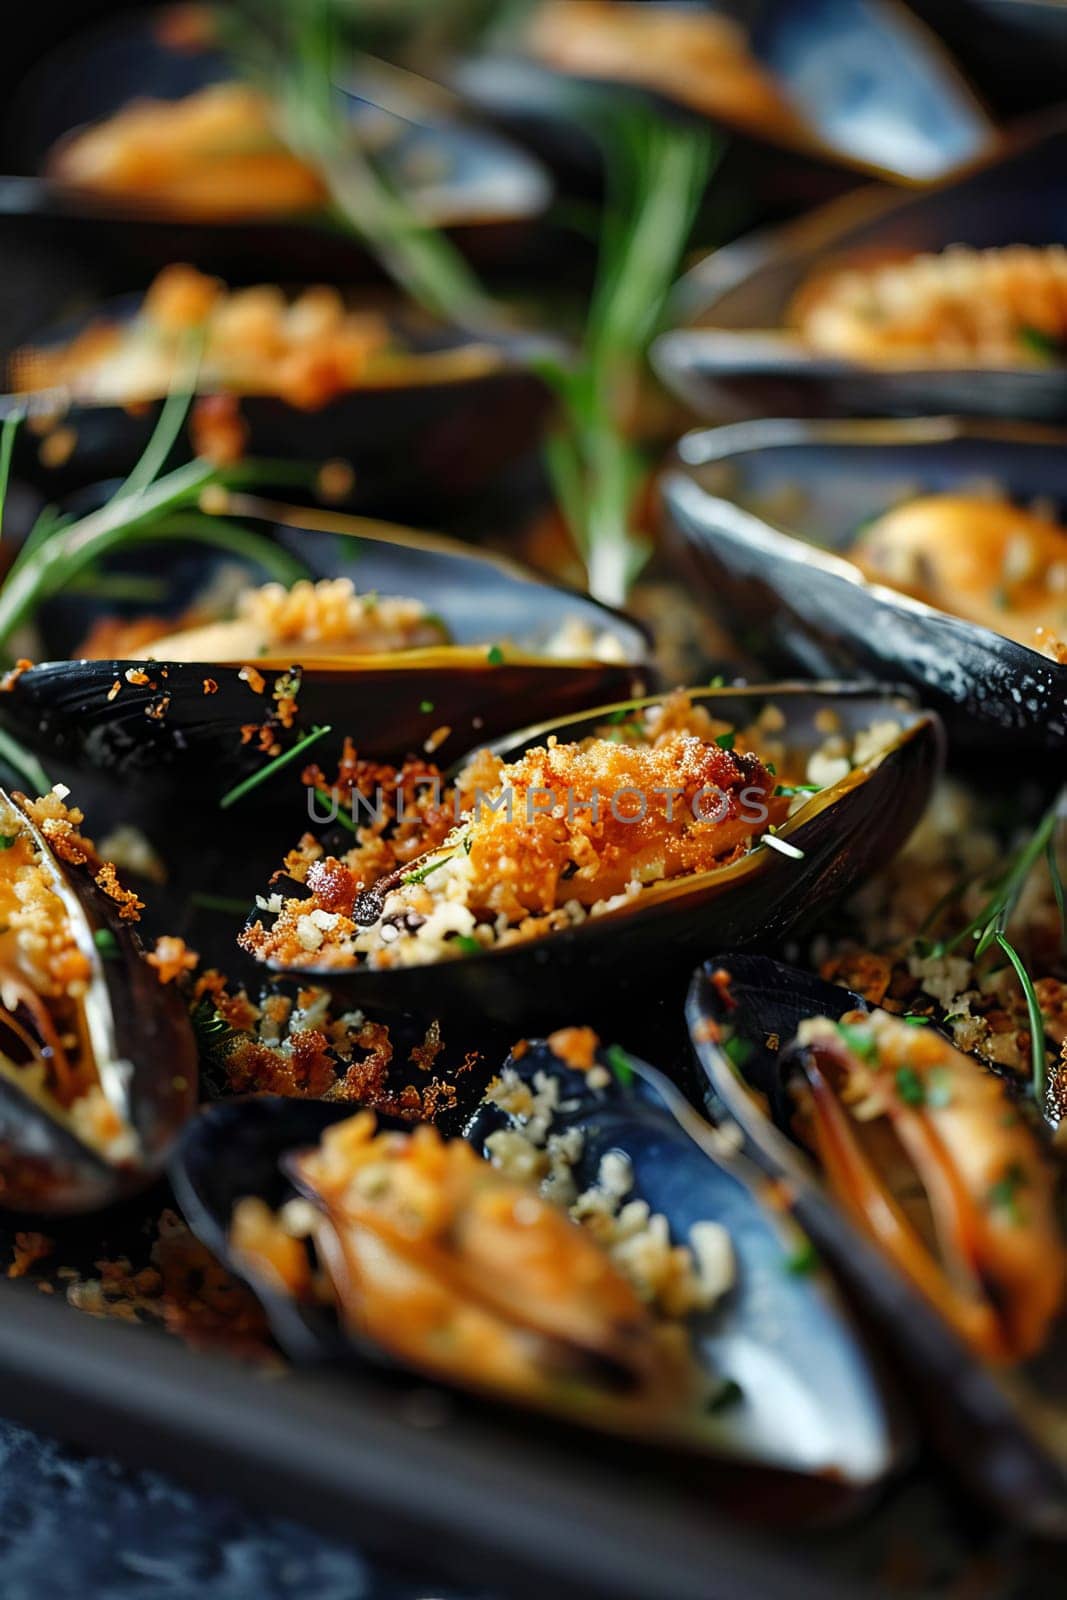 mussels in mussels in sauce. Selective focus. Food.